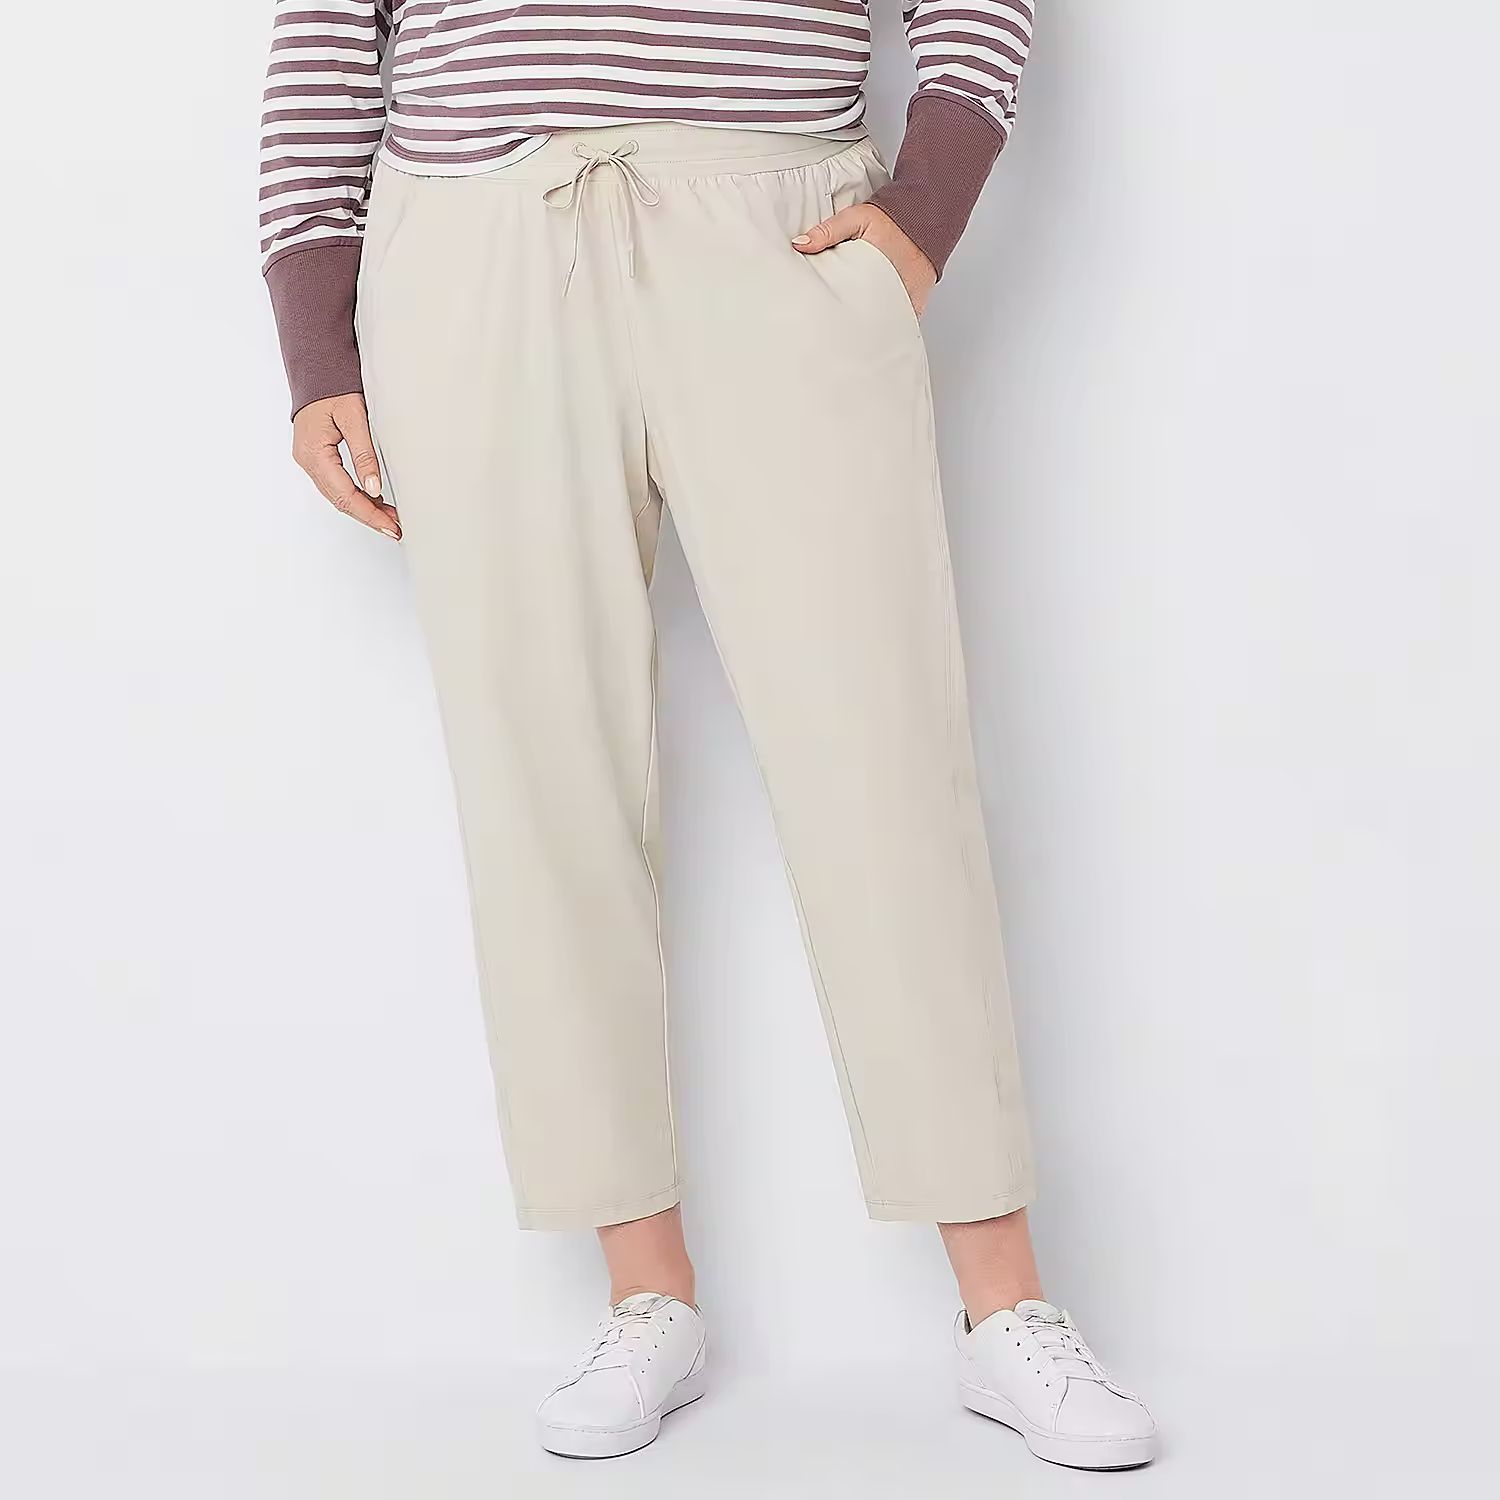 Stylus-Plus Womens Mid Rise Ankle Pull-On Pants | JCPenney